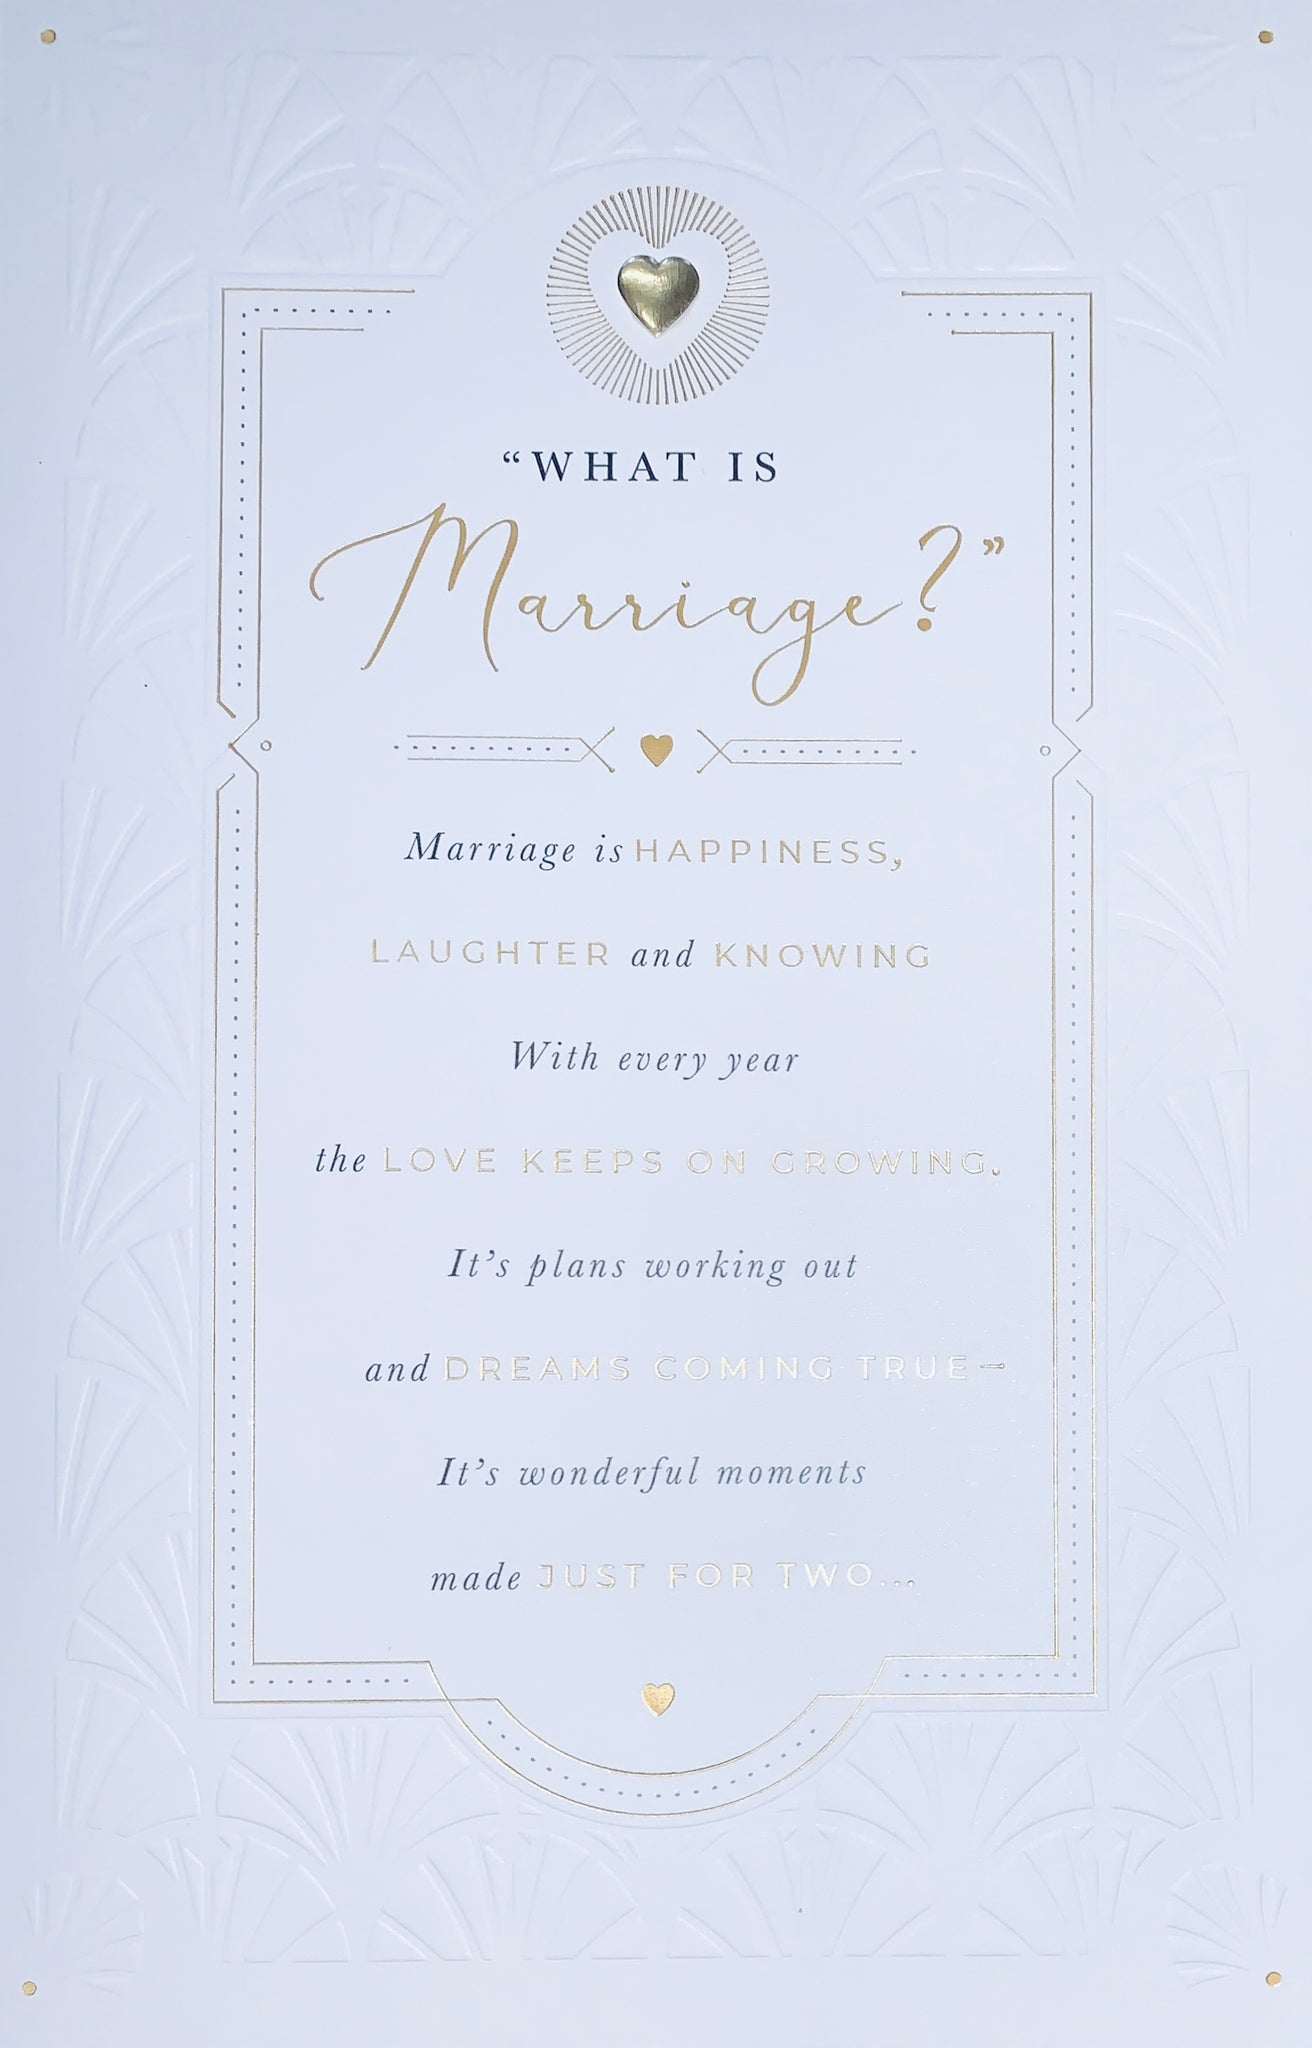 Wedding day card - what is marriage